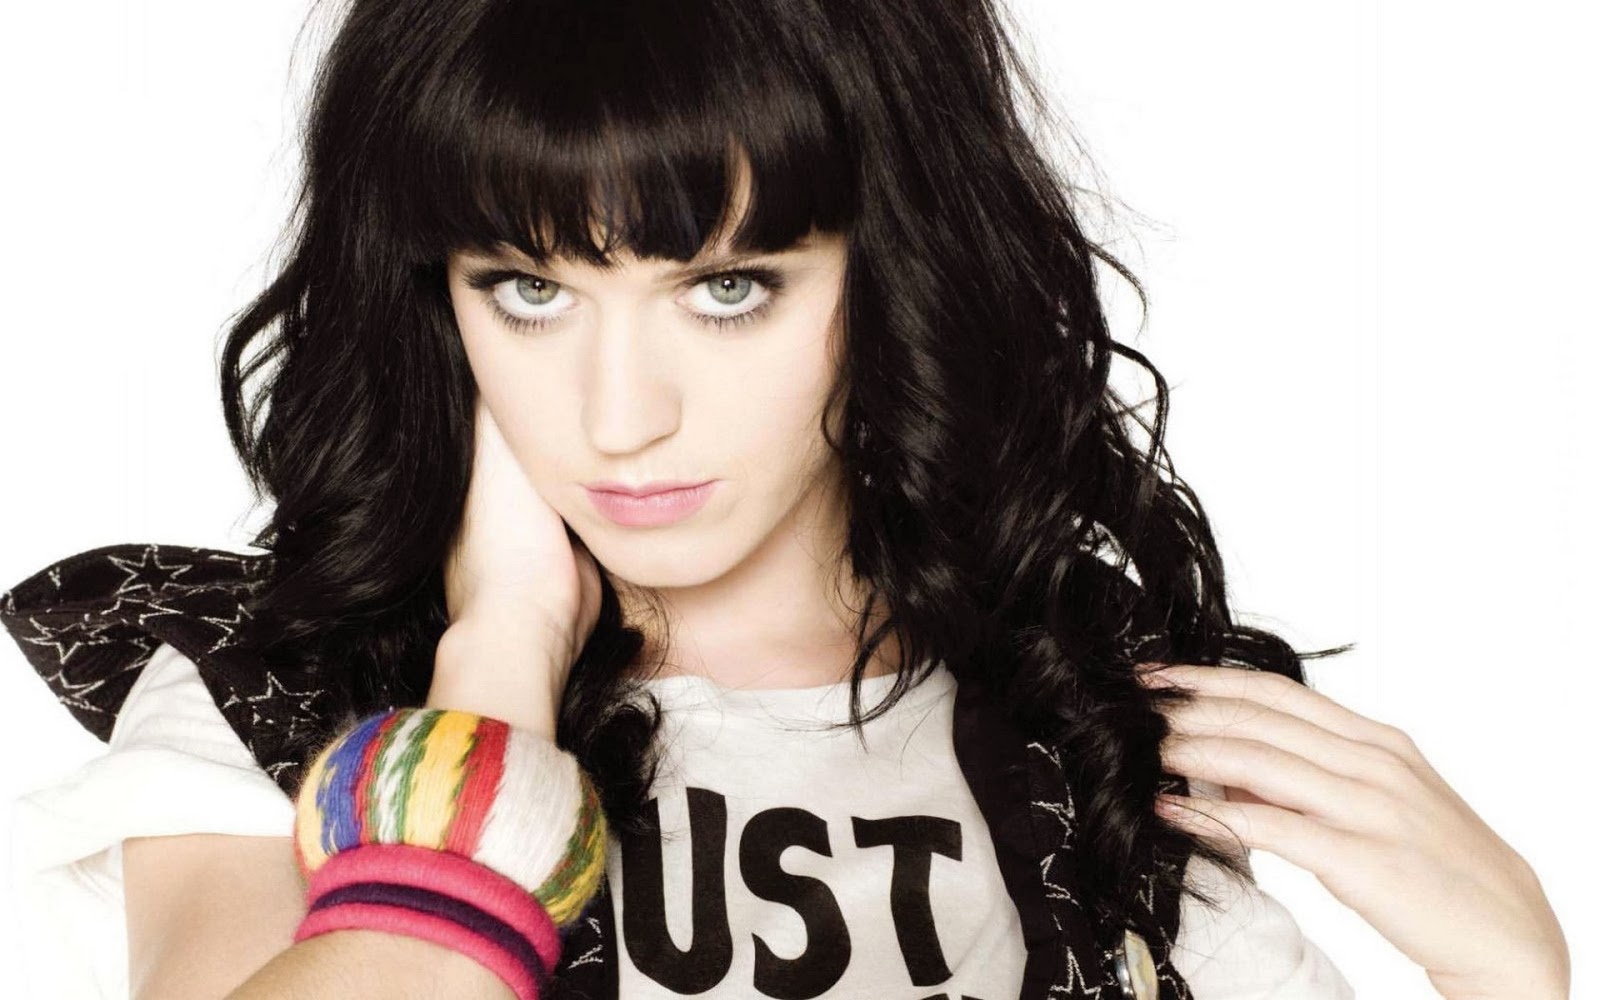 Katy Perry Wallpapers